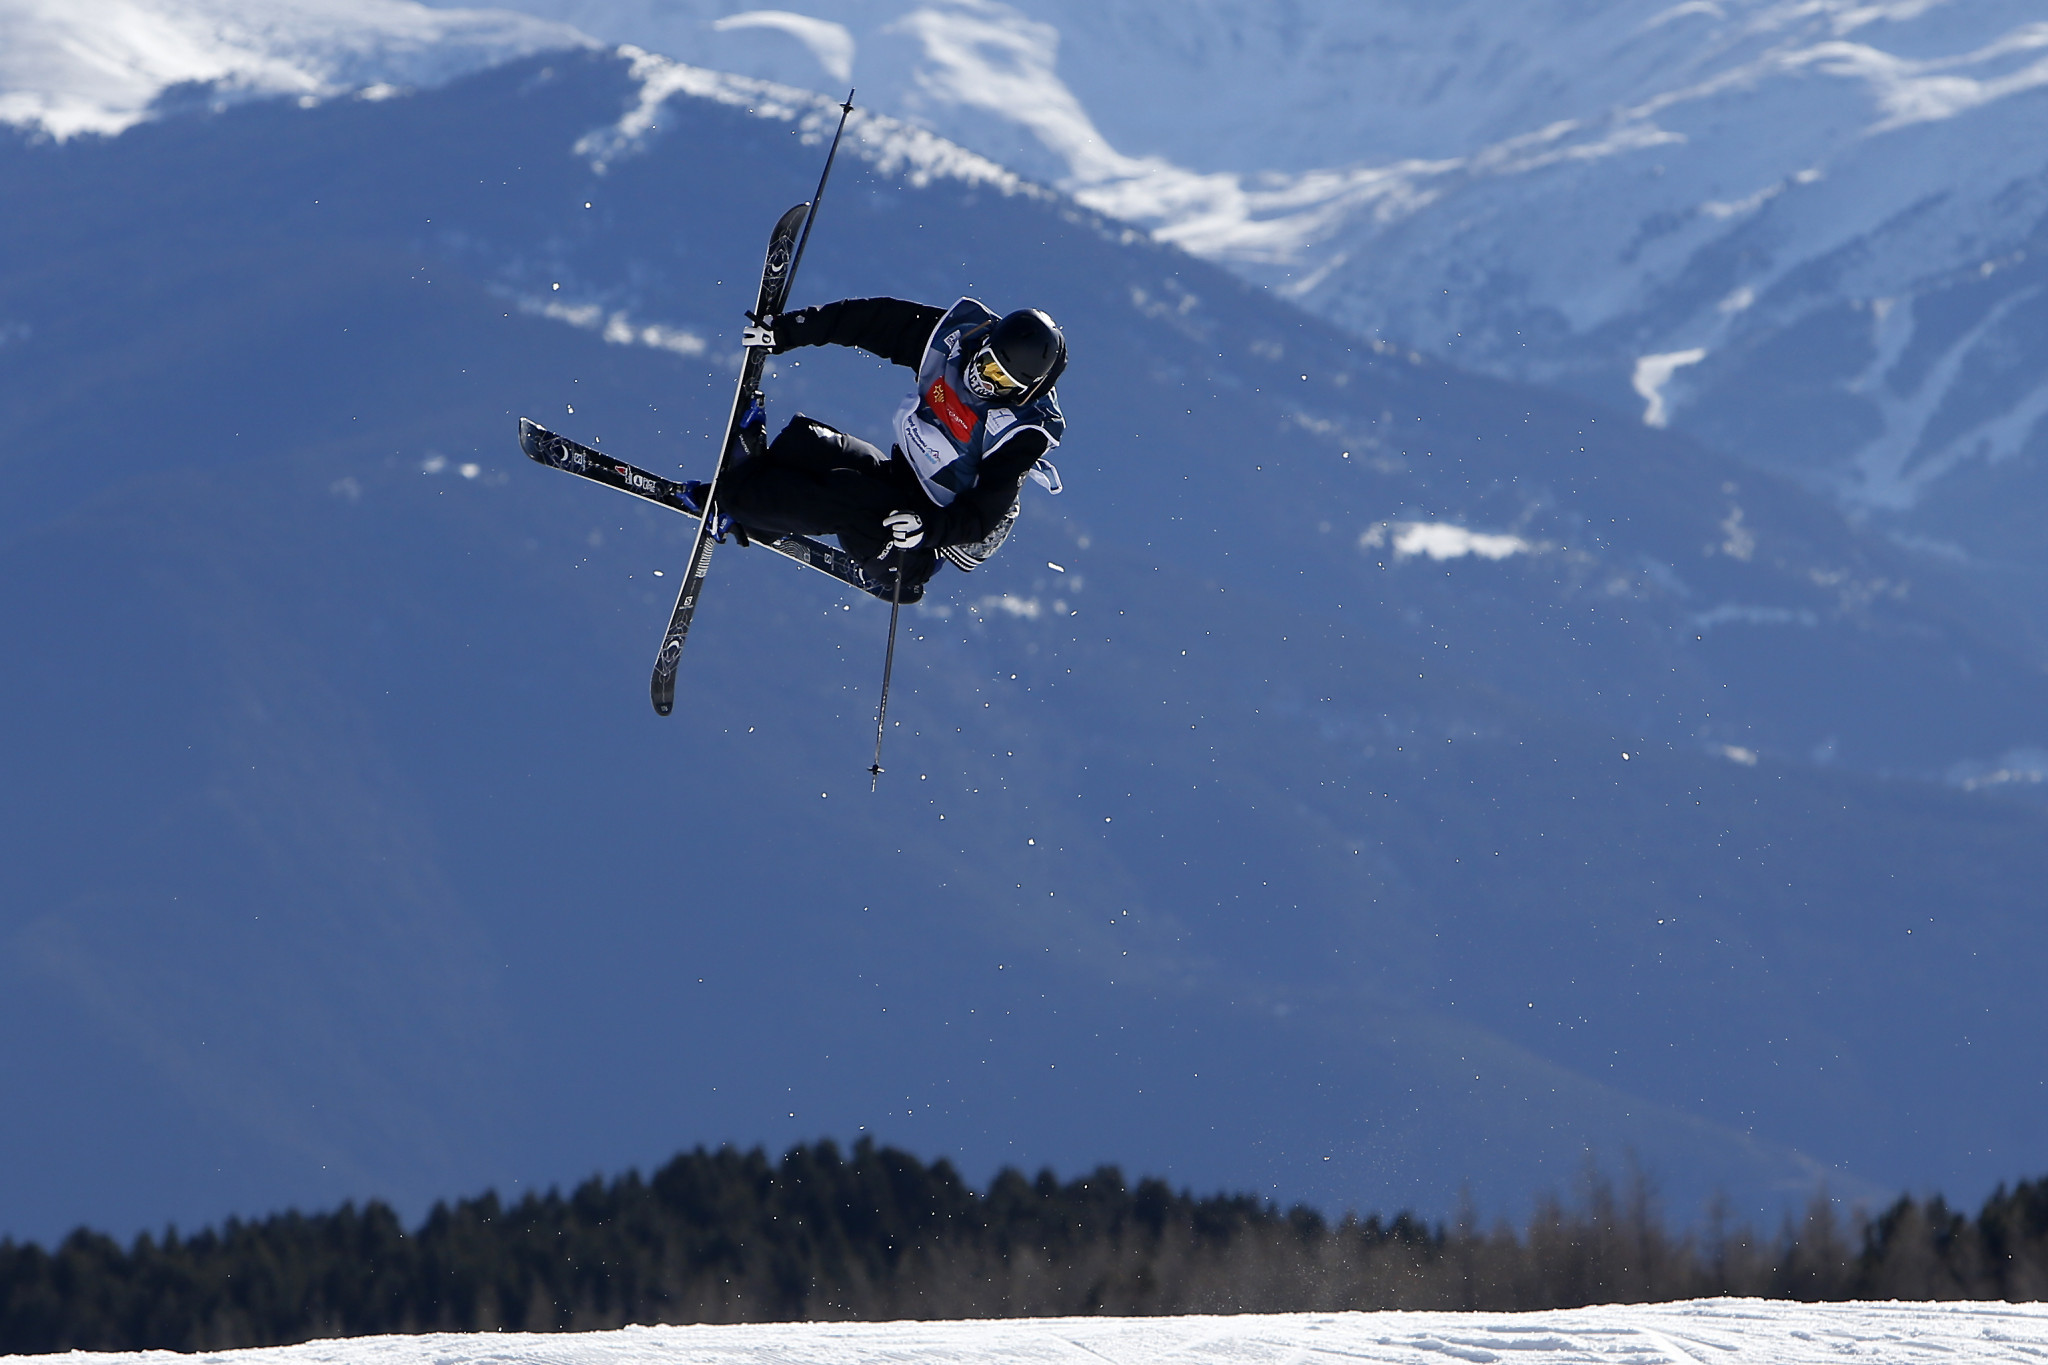 The FIS Freestyle Skiing World Cup tour is set to resume tomorrow when Font Romeu in France plays host to the opening day of this season’s second slopestyle event ©Getty Images